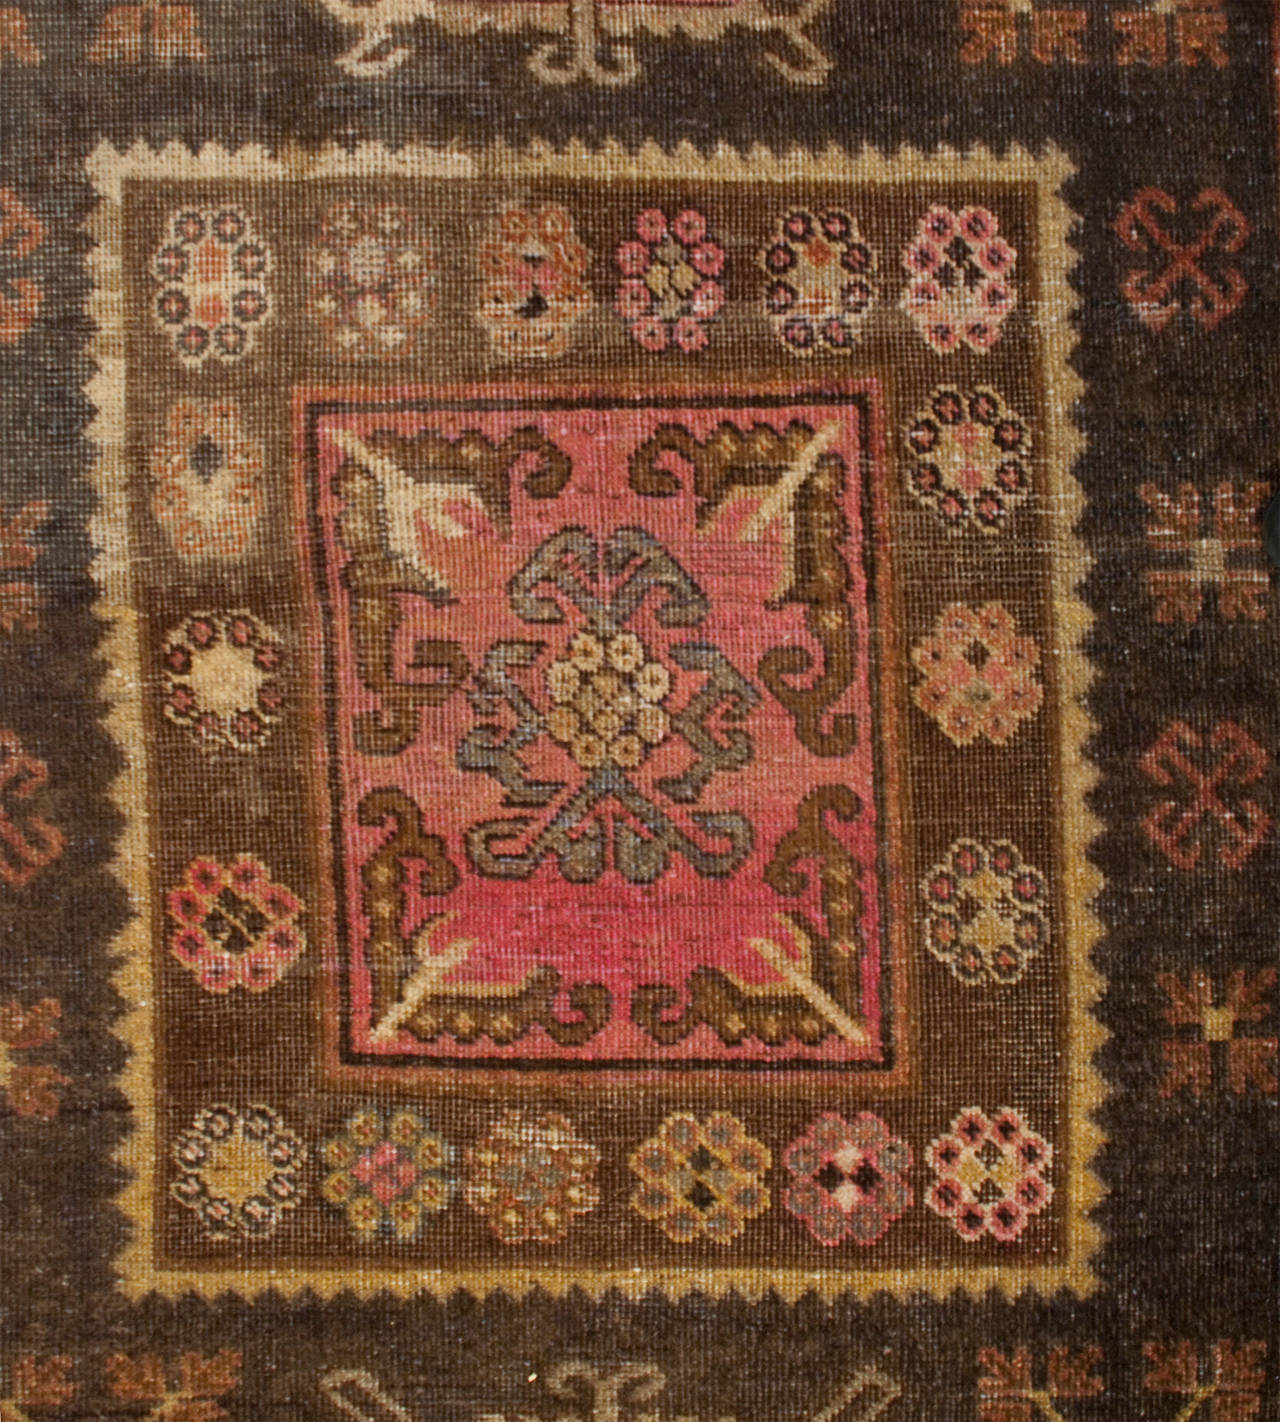 An early 20th century Central Asian Khotan rug with three central medallions, two circular and one square on a natural un-dyed background, surrounded by multiple contrasting geometric borders.